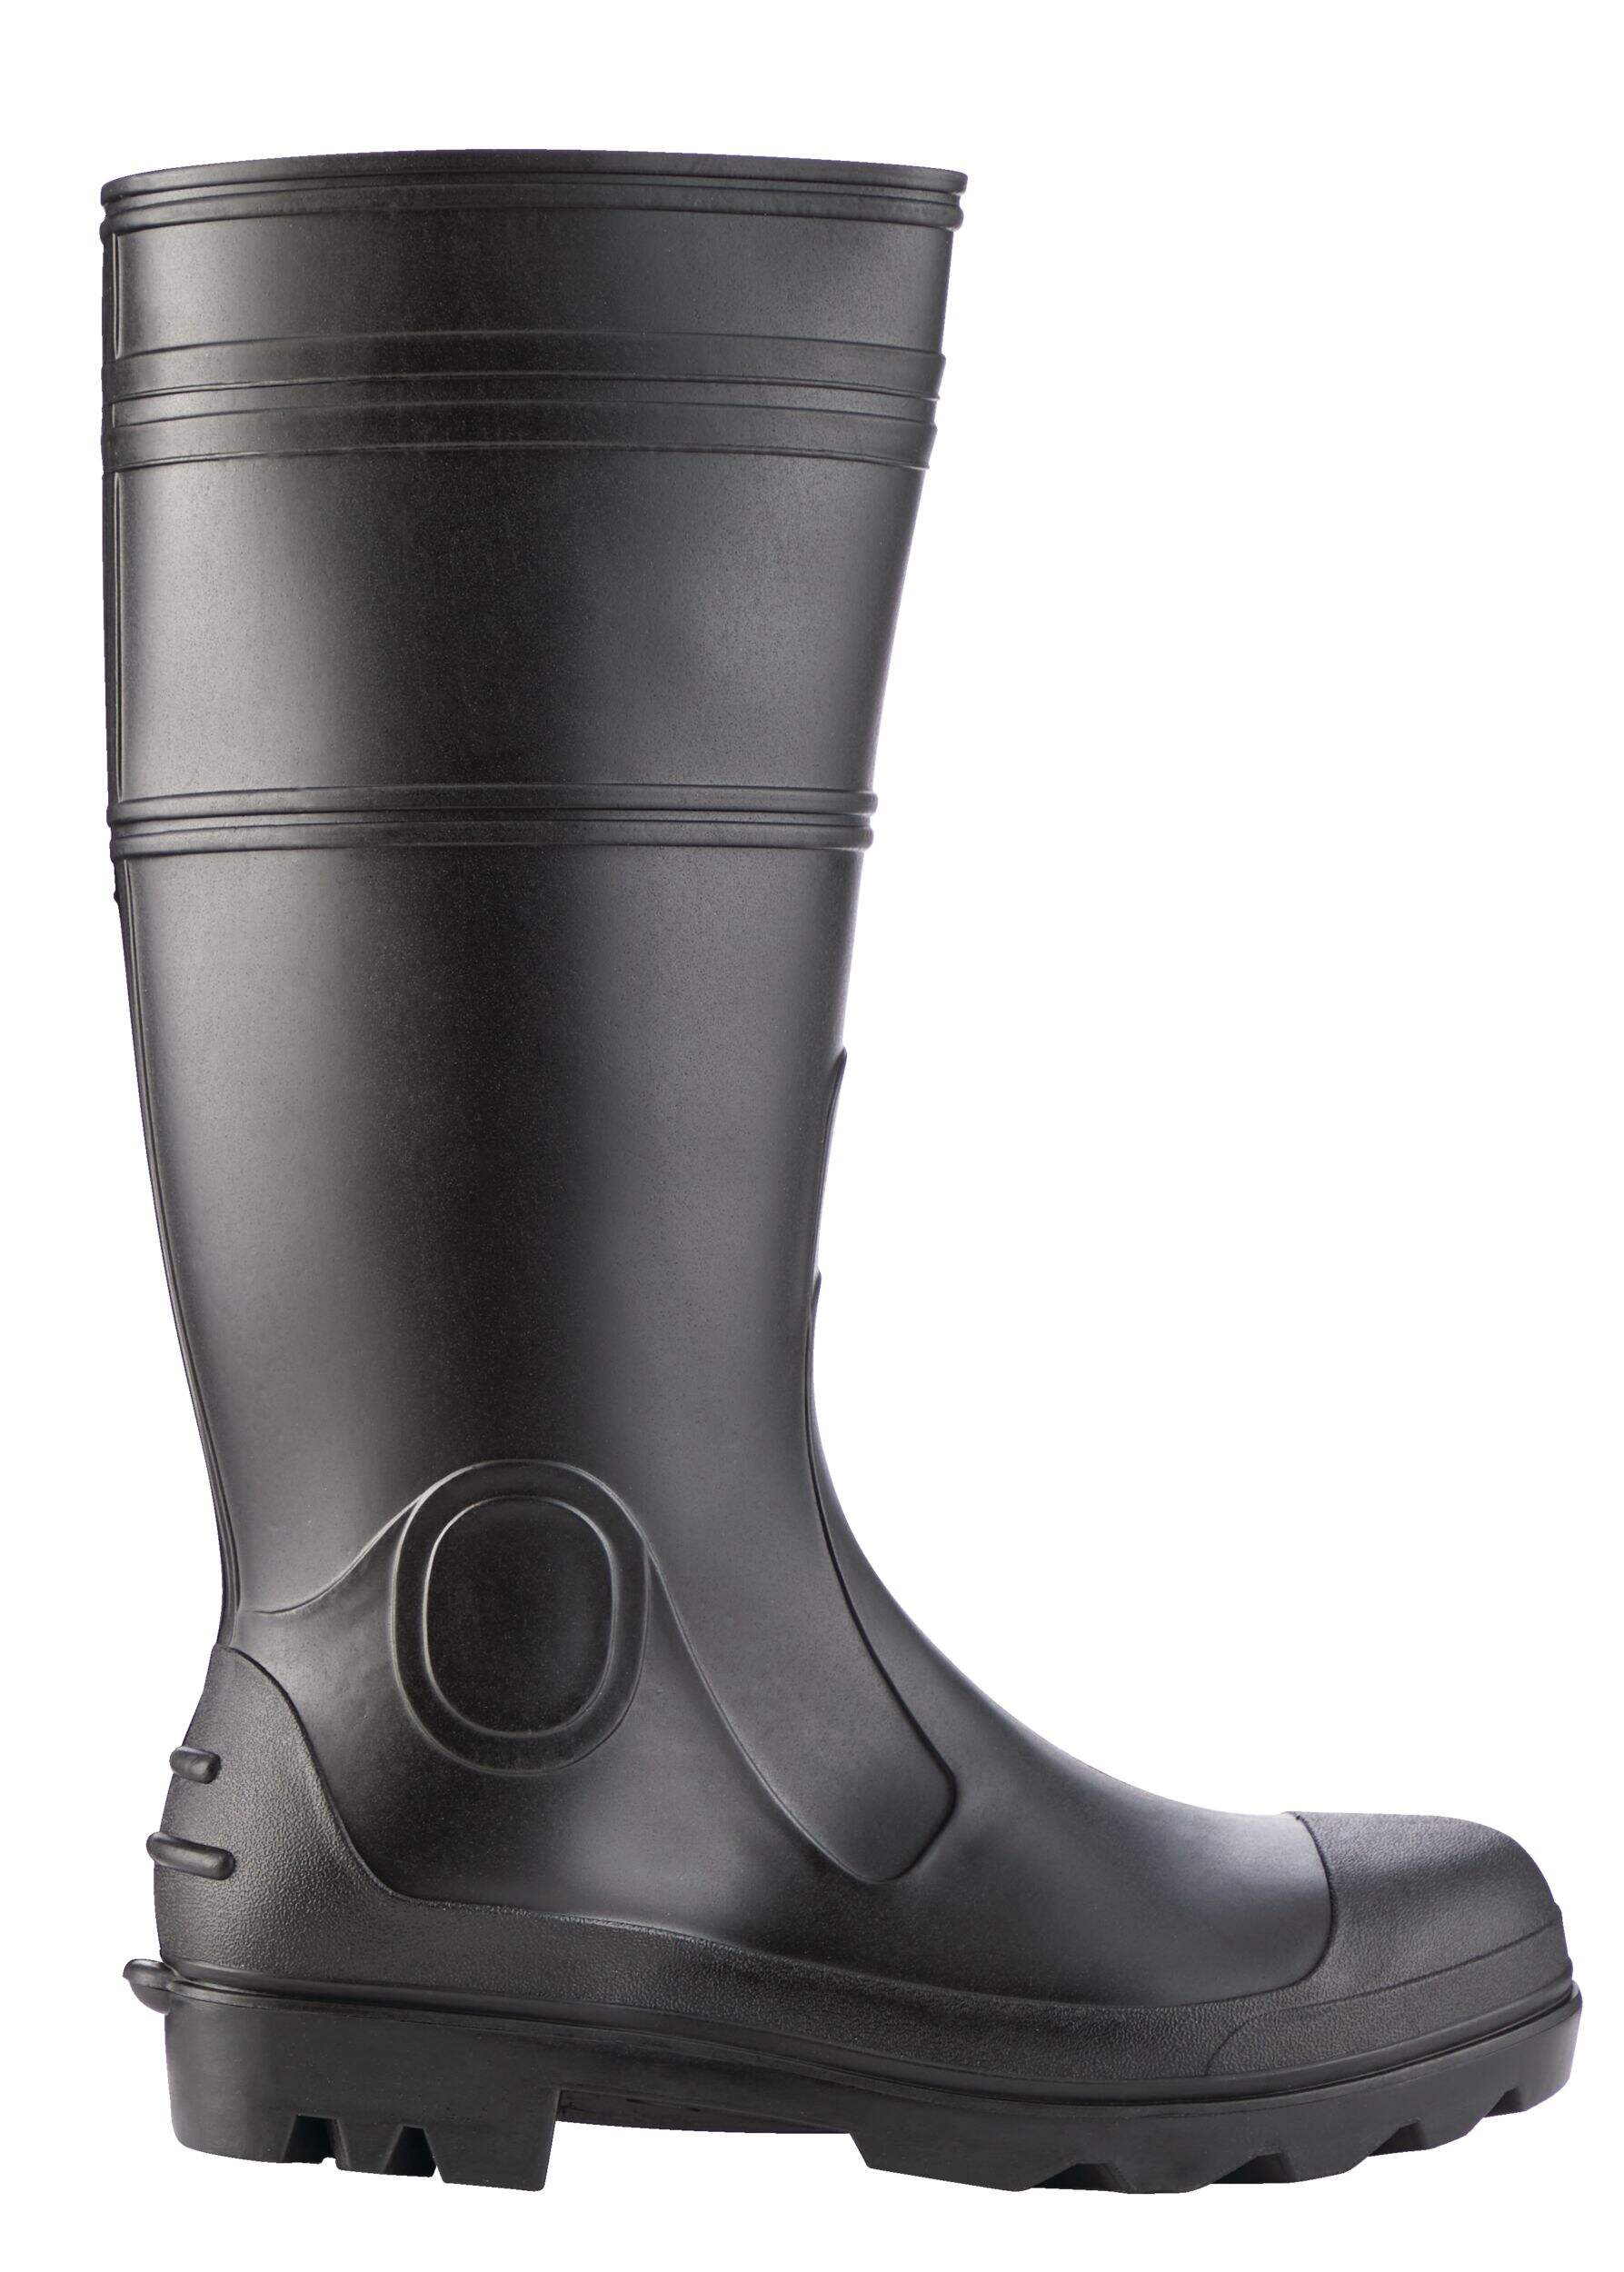 Outbound Men's Waterproof Rain Boots with Cushioned Insole | Canadian Tire